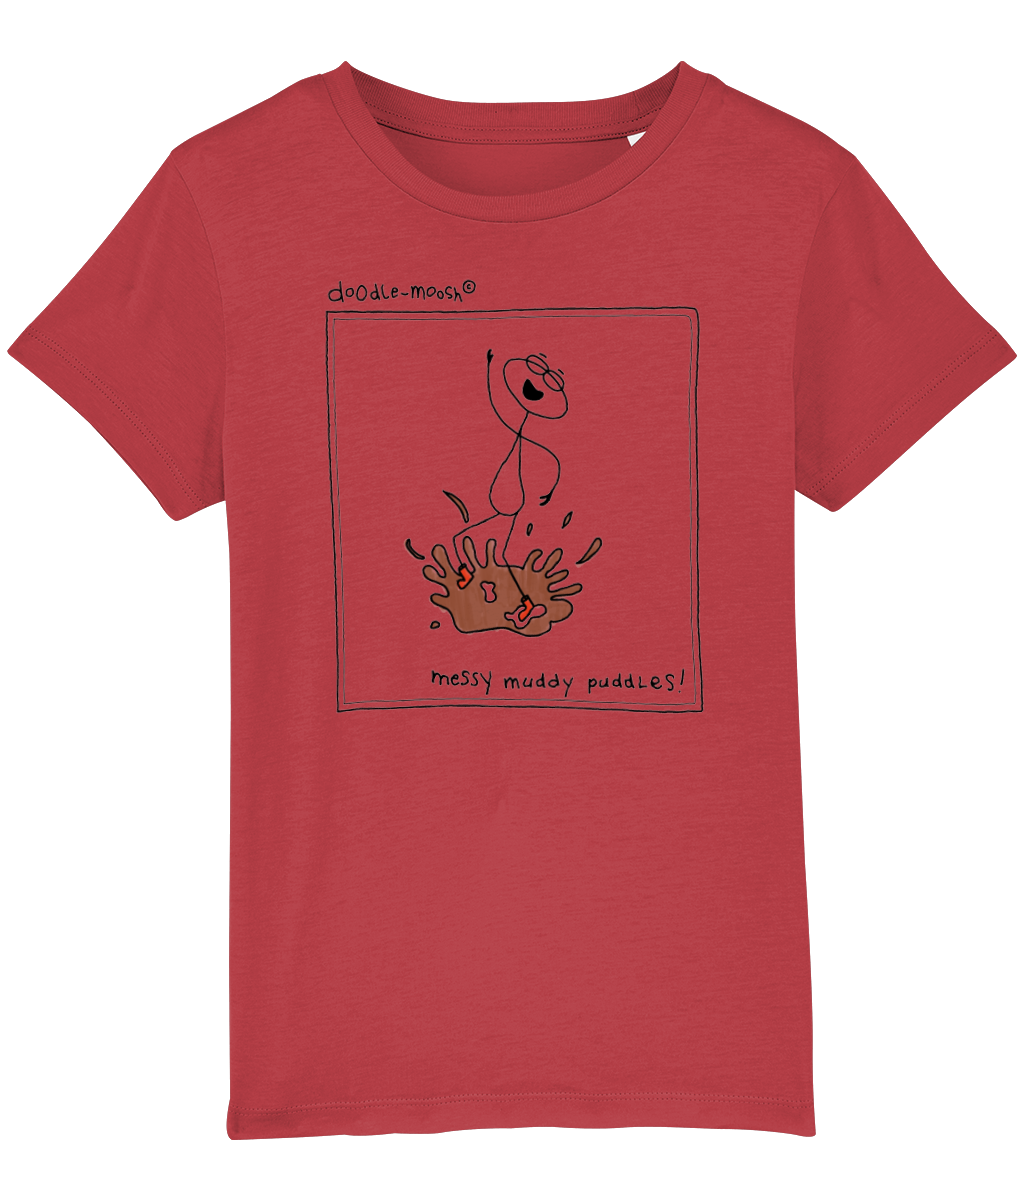 Messy muddy puddles t-shirt, red with black, colourful drawings